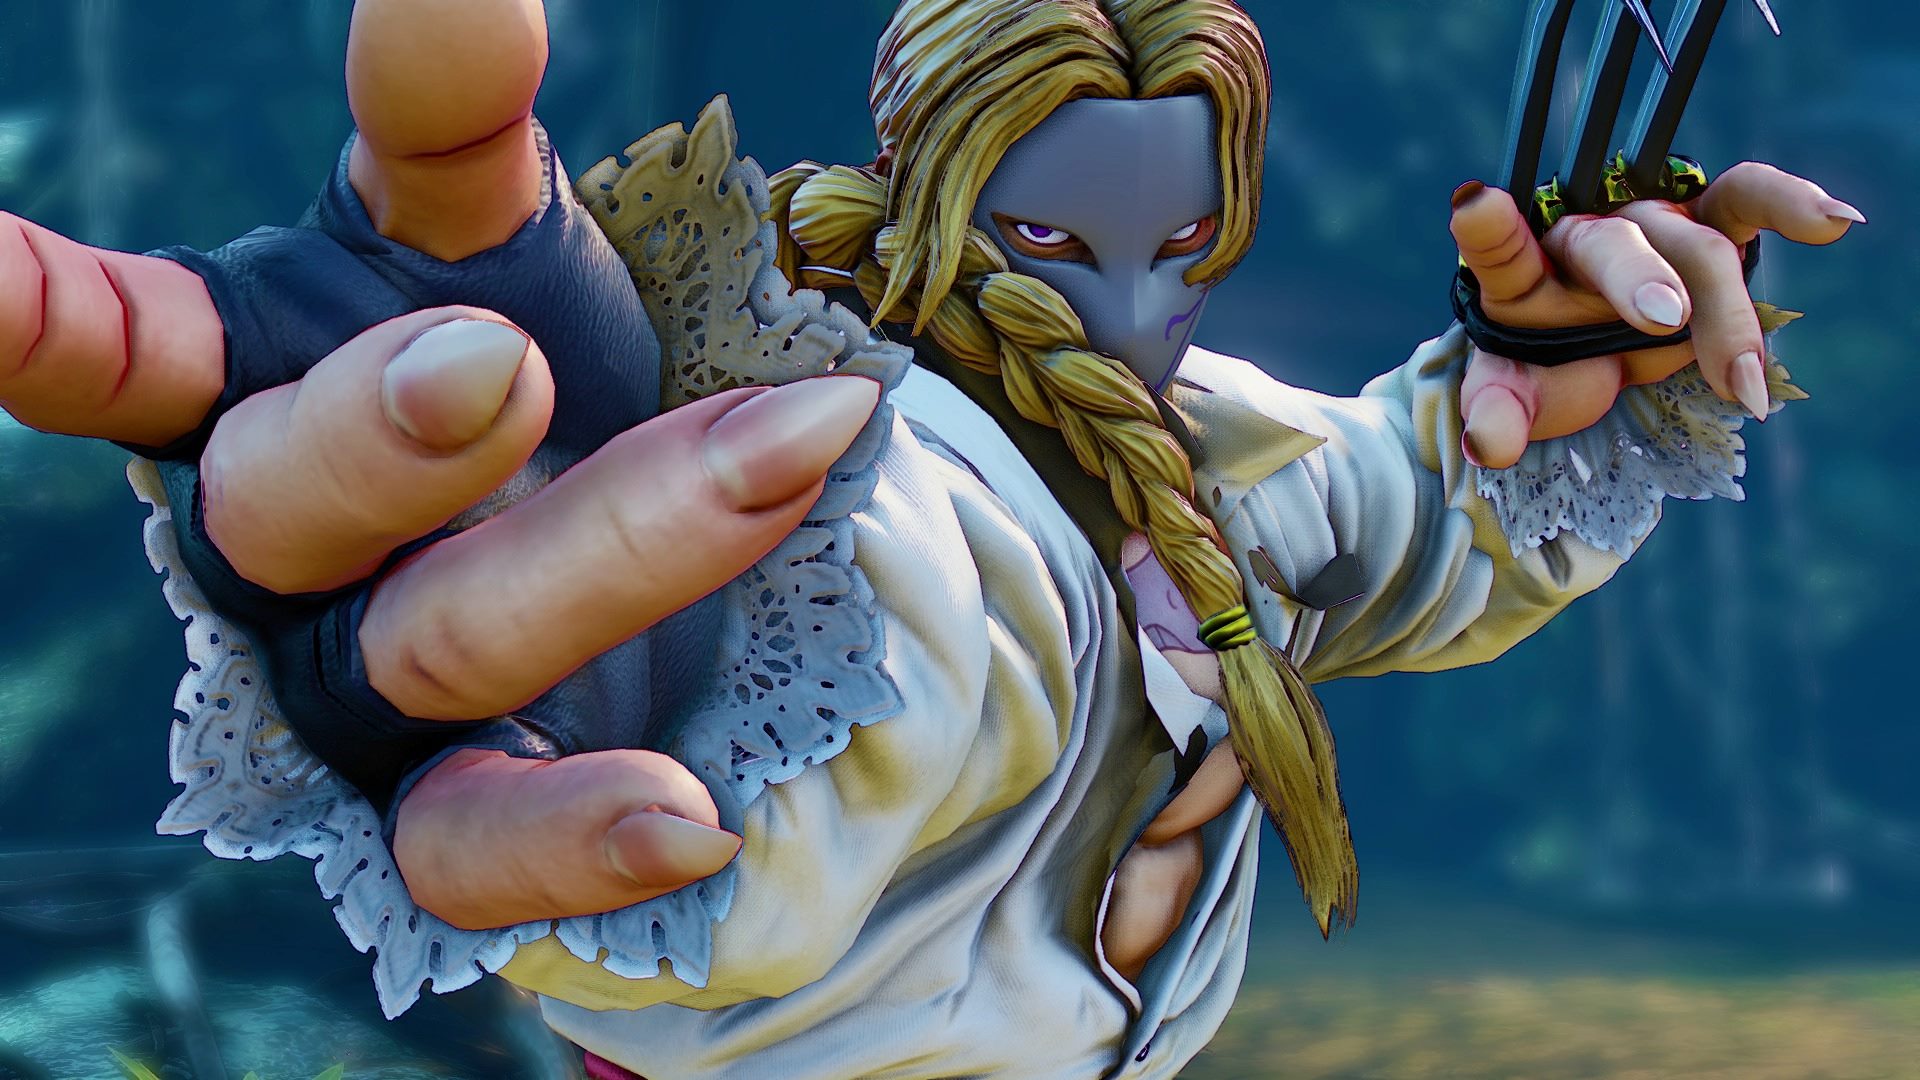 17 Facts About Vega (Street Fighter) 